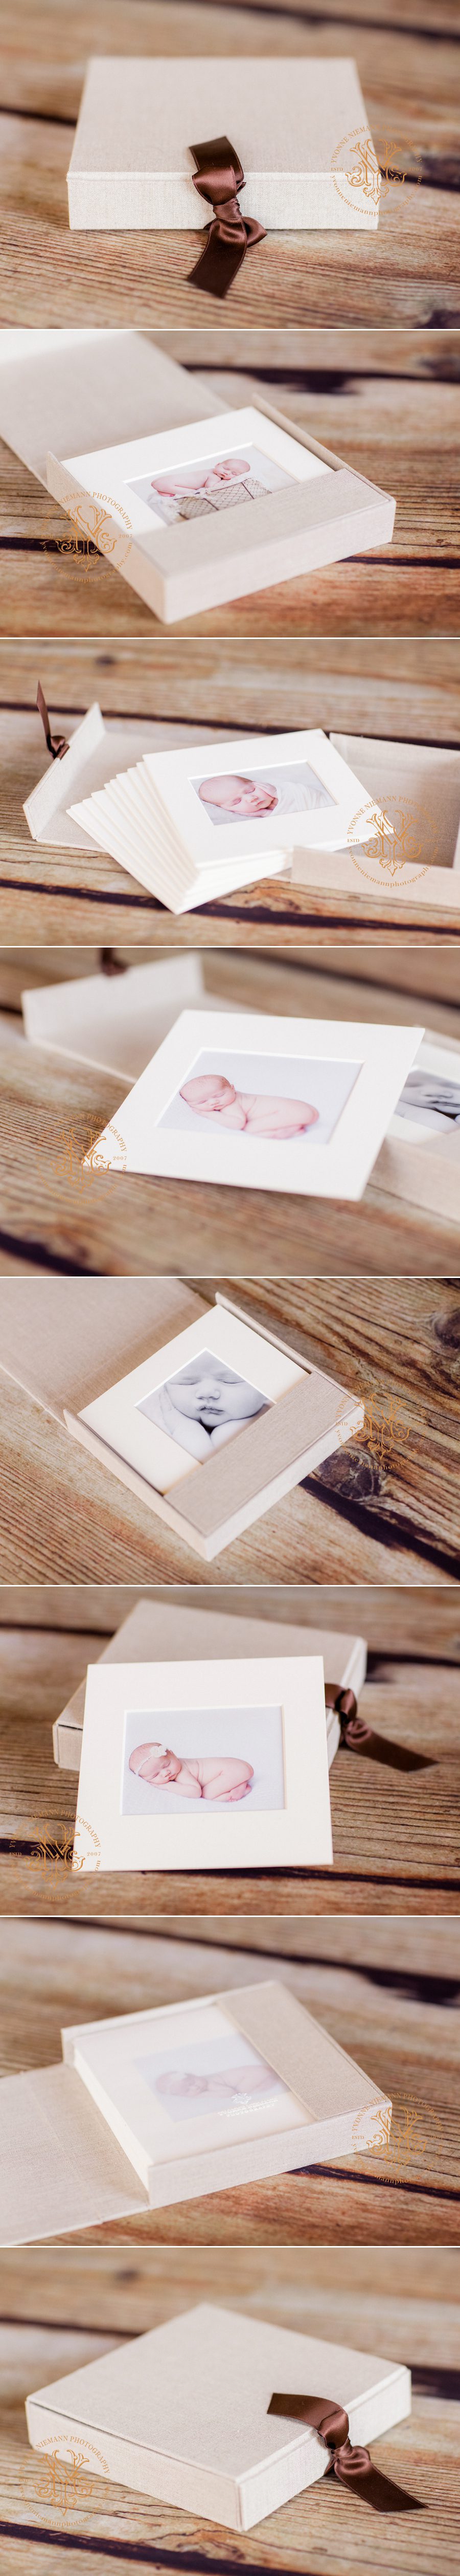 Mini fine art image box offered by Yvonne Niemann Photography.